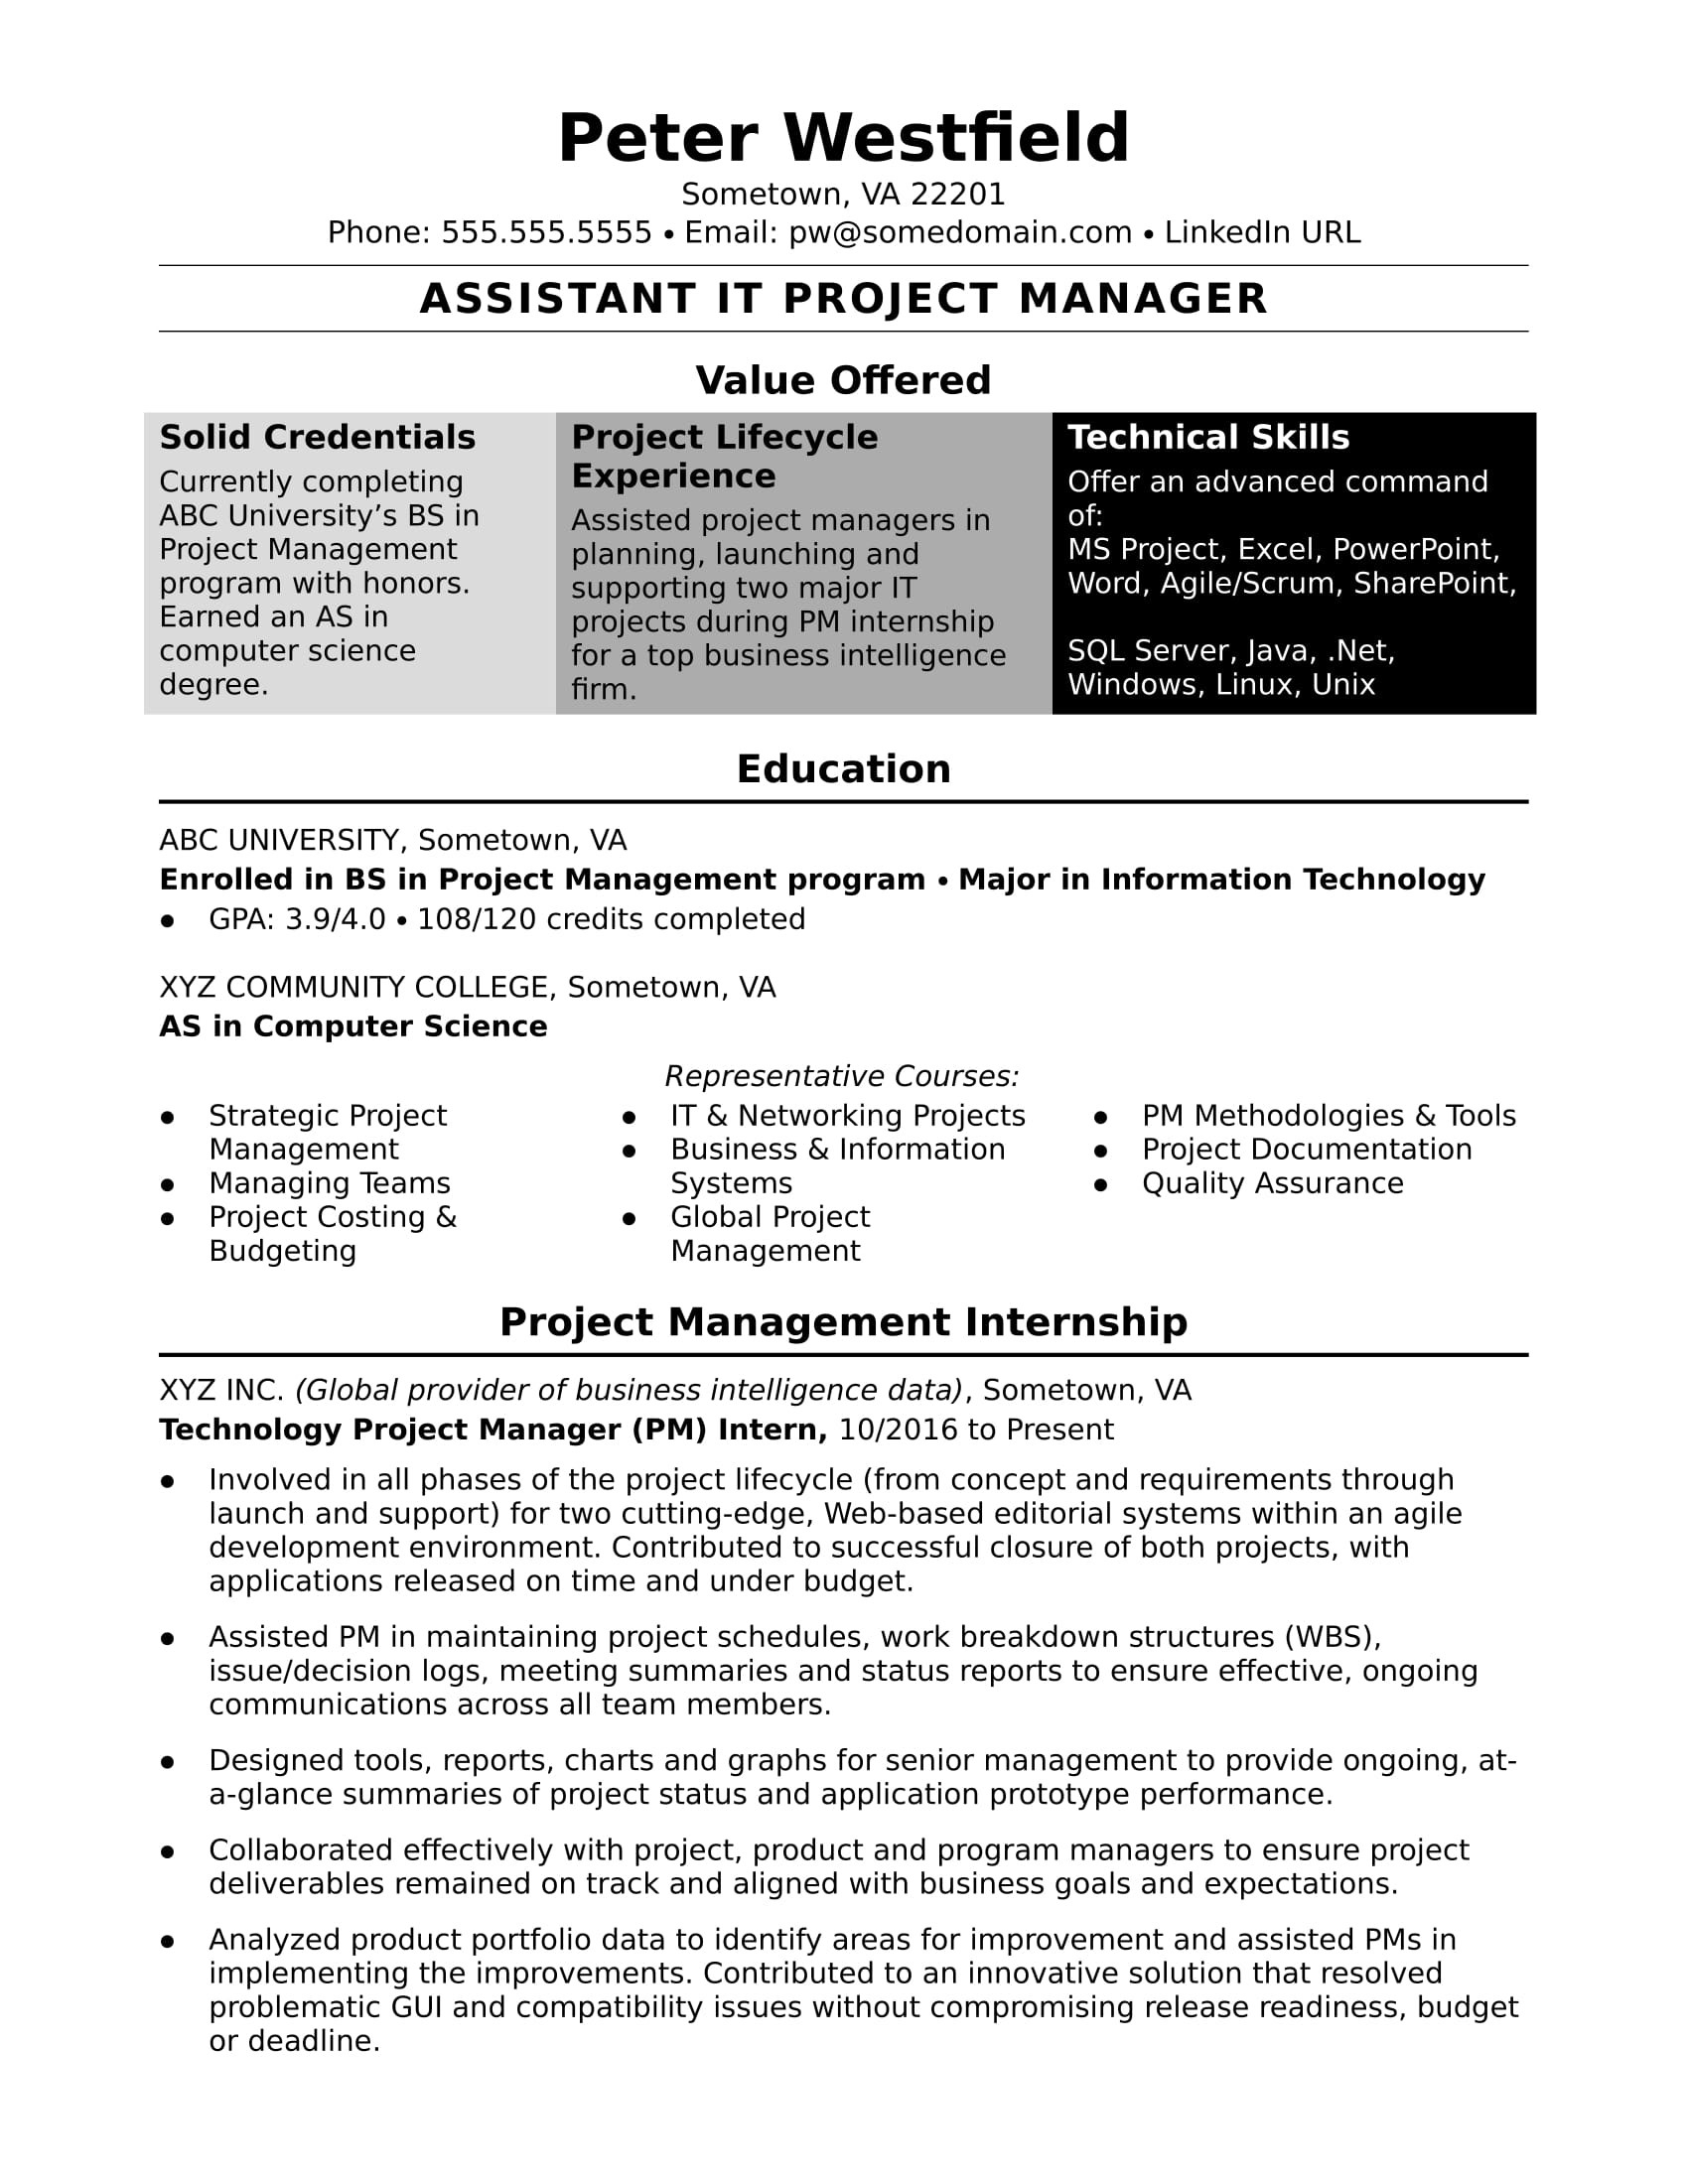 Sample Resume for Project Manager assistant Sample Resume for An assistant It Project Manager Monster.com